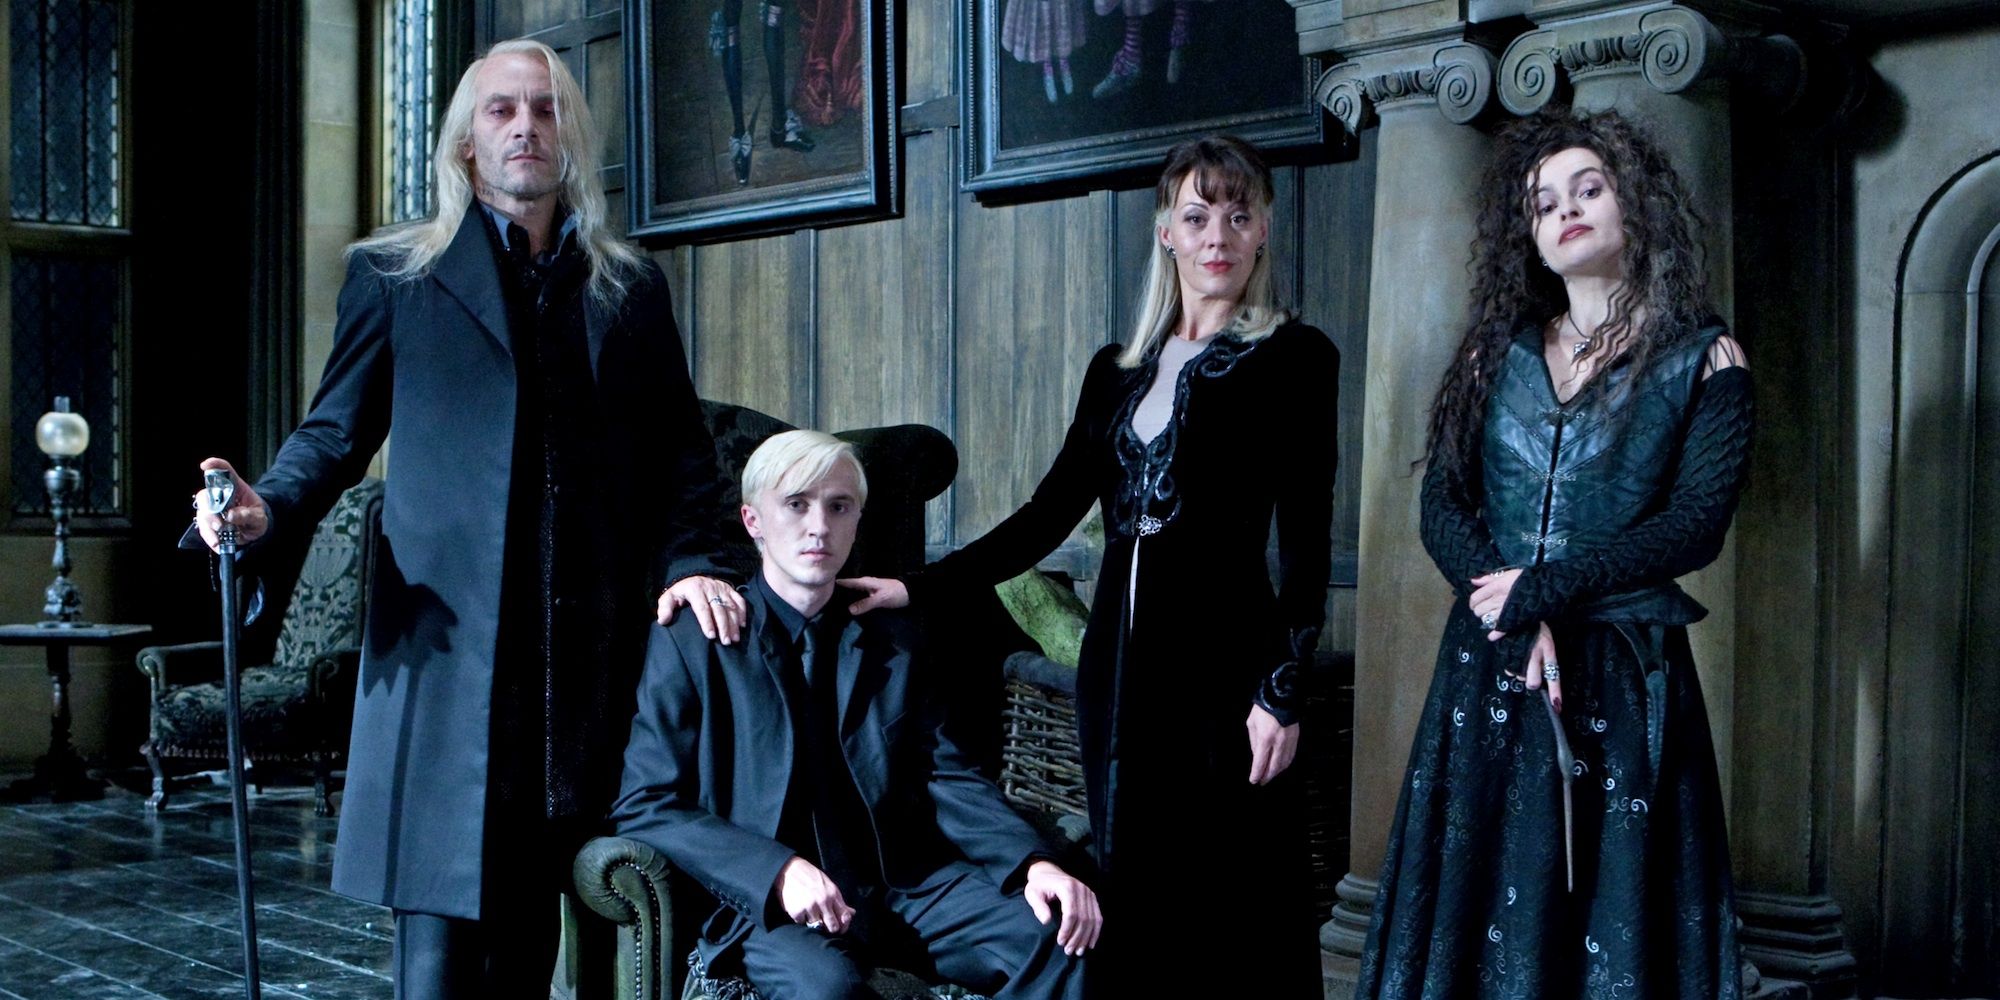 Malfoy family standing together at Malfoy Manor in Deathly Hallows